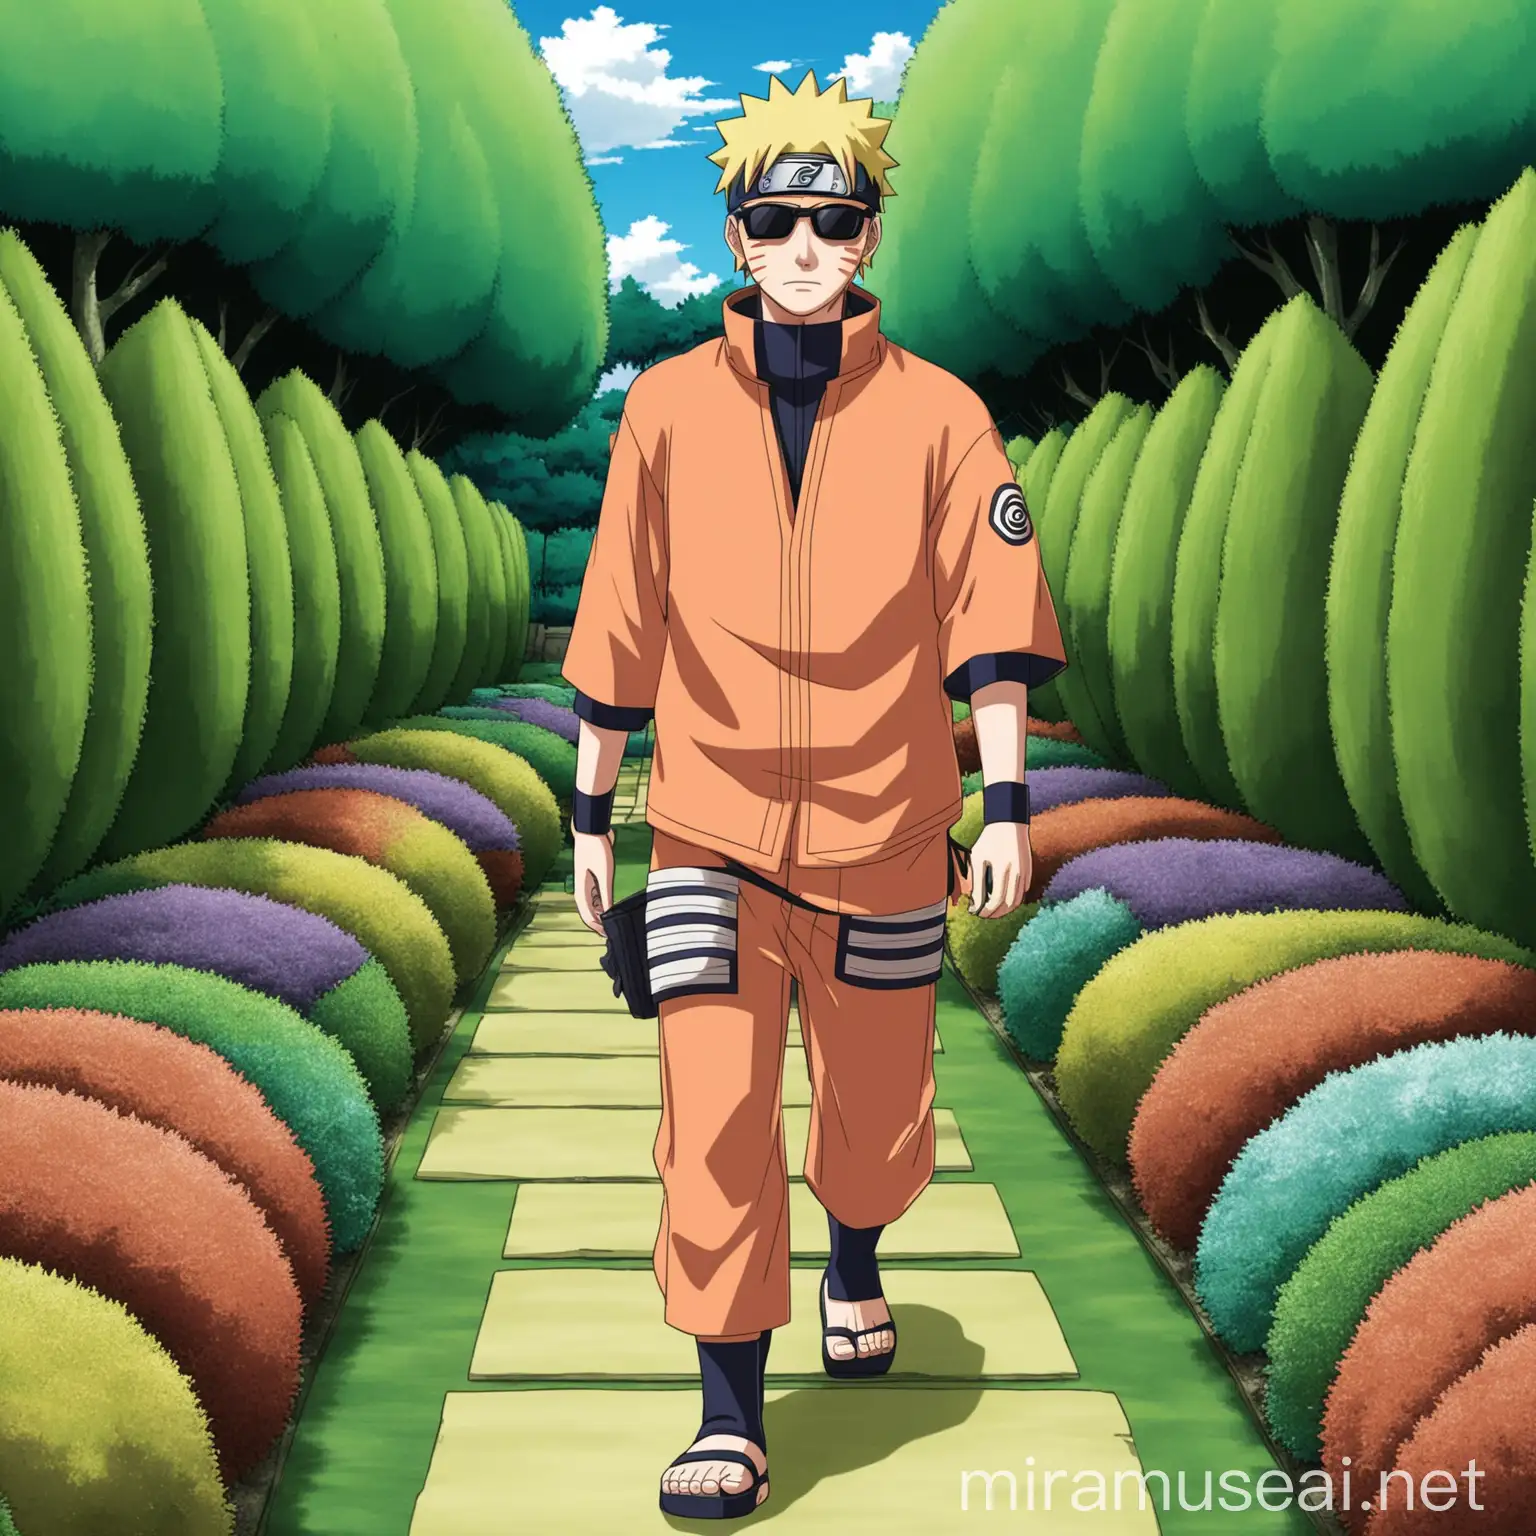 Cool Naruto Strolling Through Serene Garden with Sunglasses